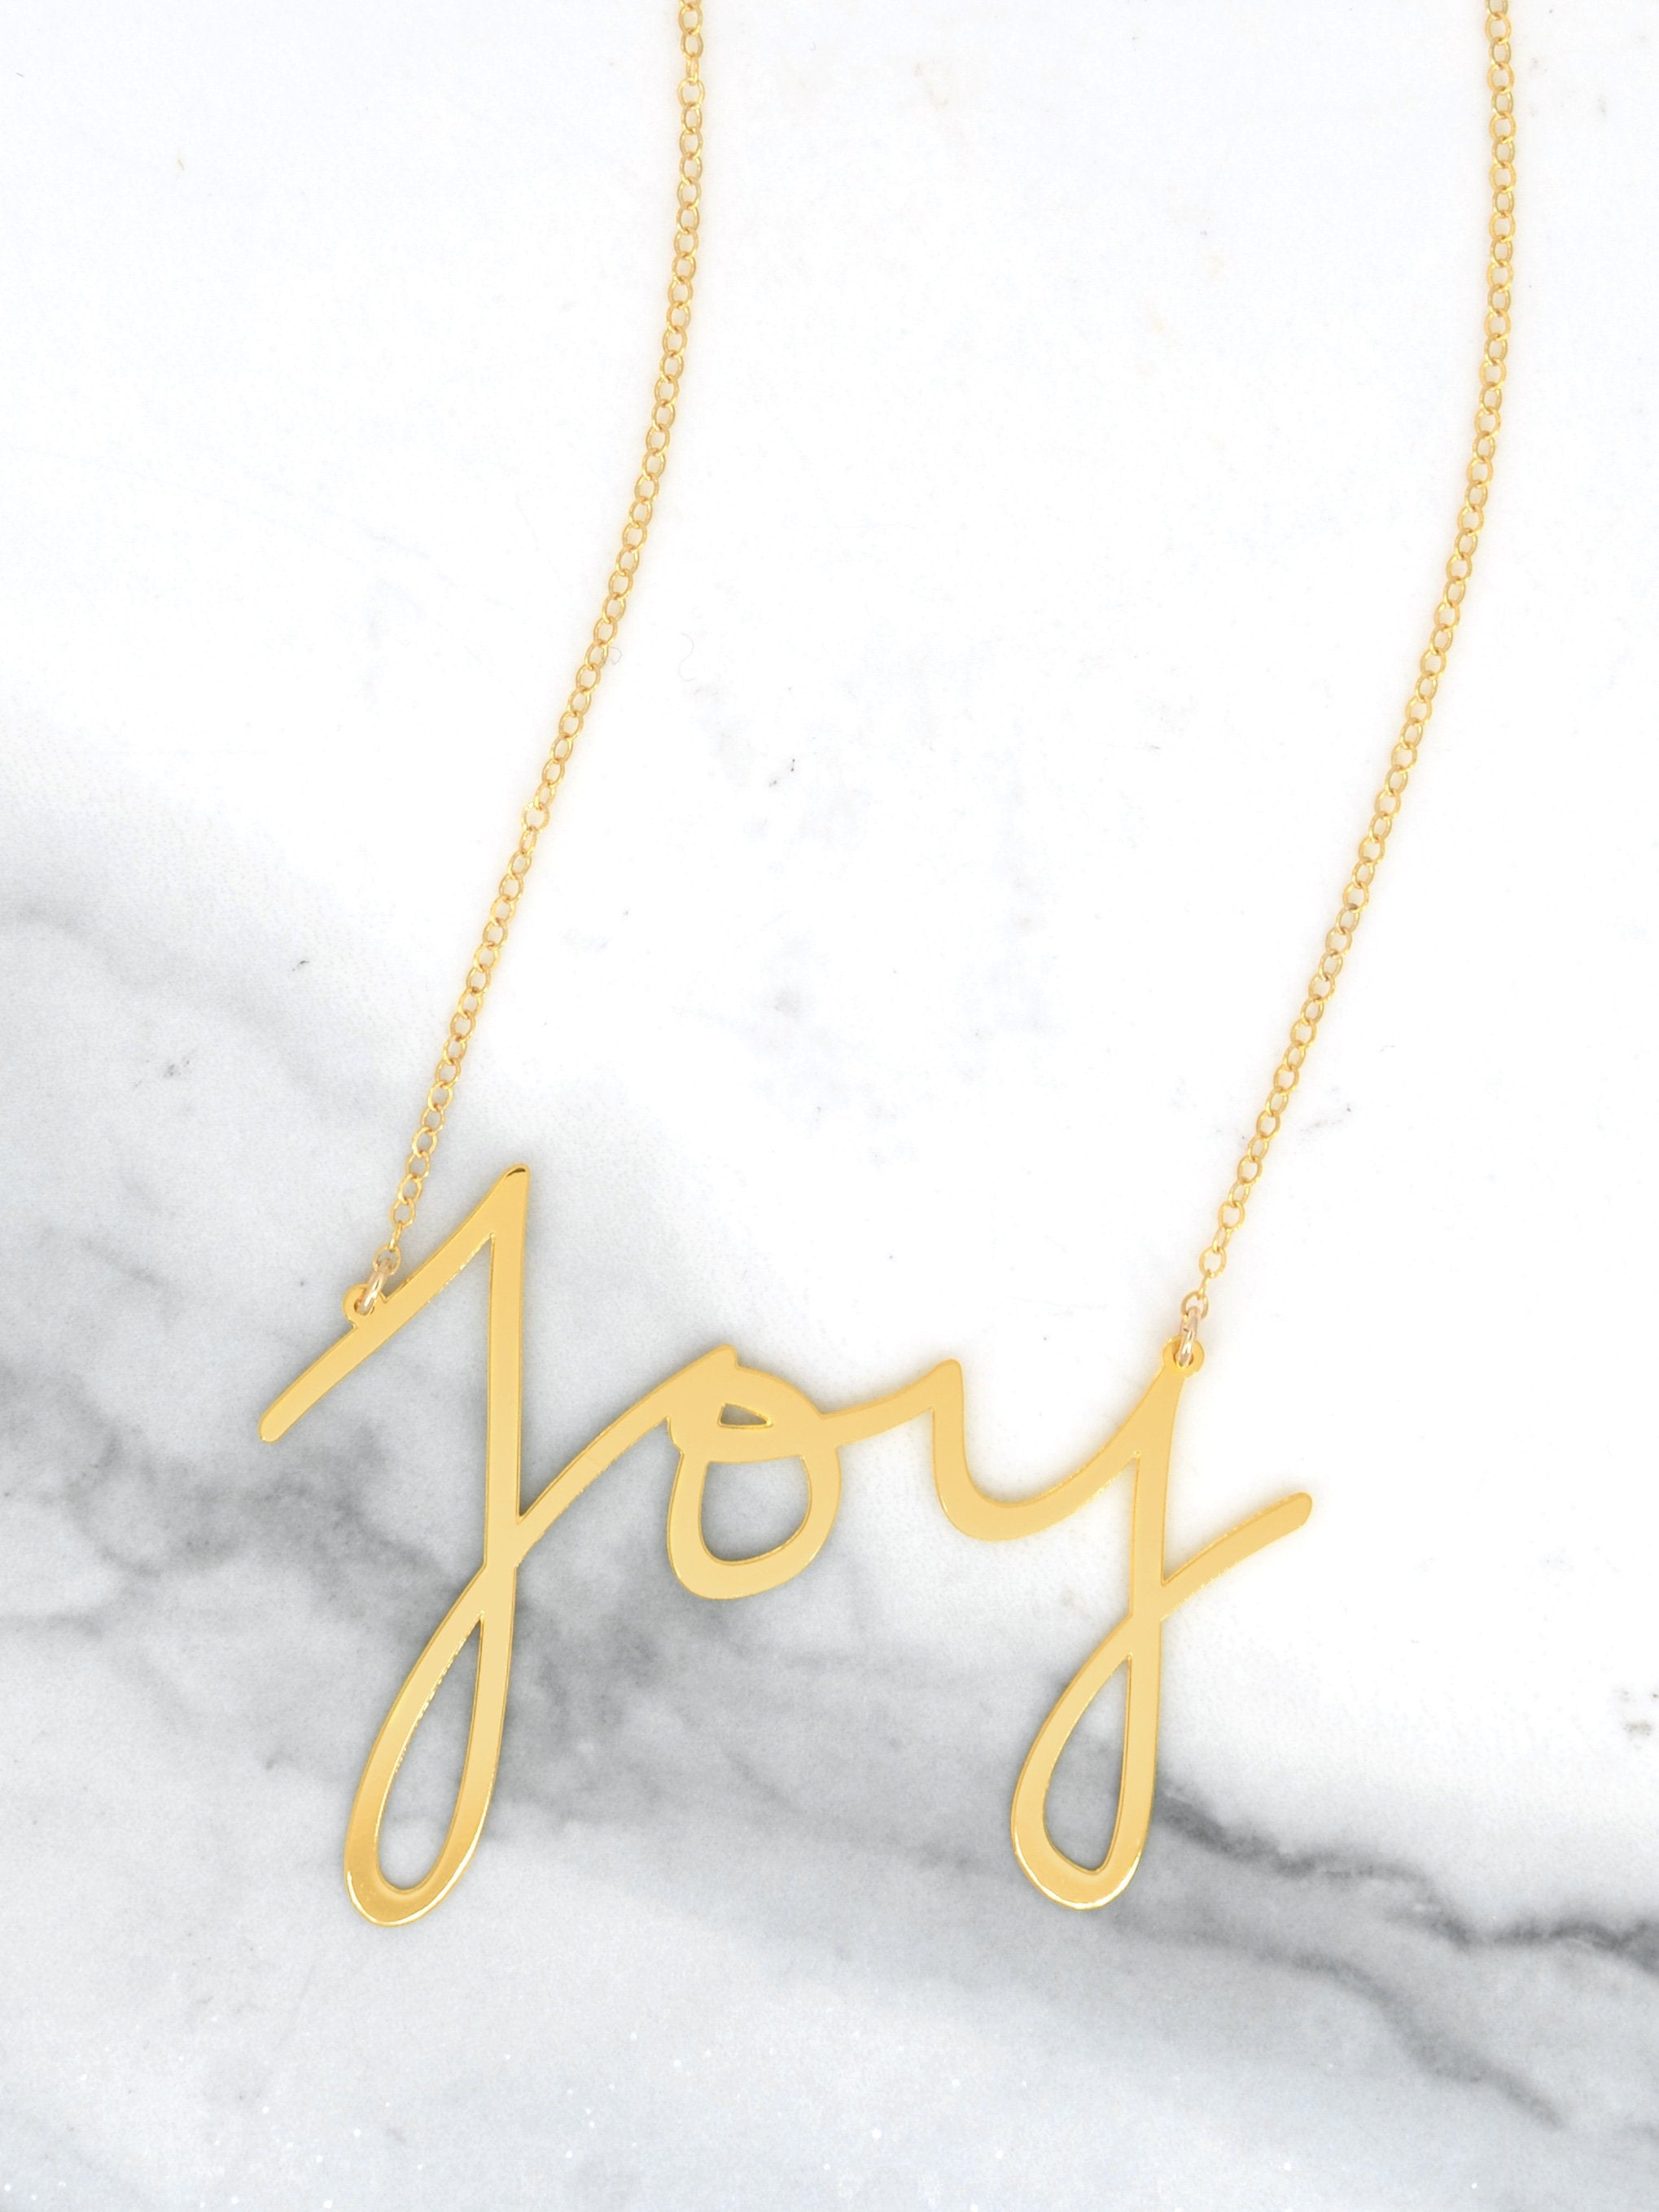 Joy Necklace - High Quality, Affordable, Hand Written, Self Love, Mantra Word Necklace - Available in Gold and Silver - Small and Large Sizes - Made in USA - Brevity Jewelry